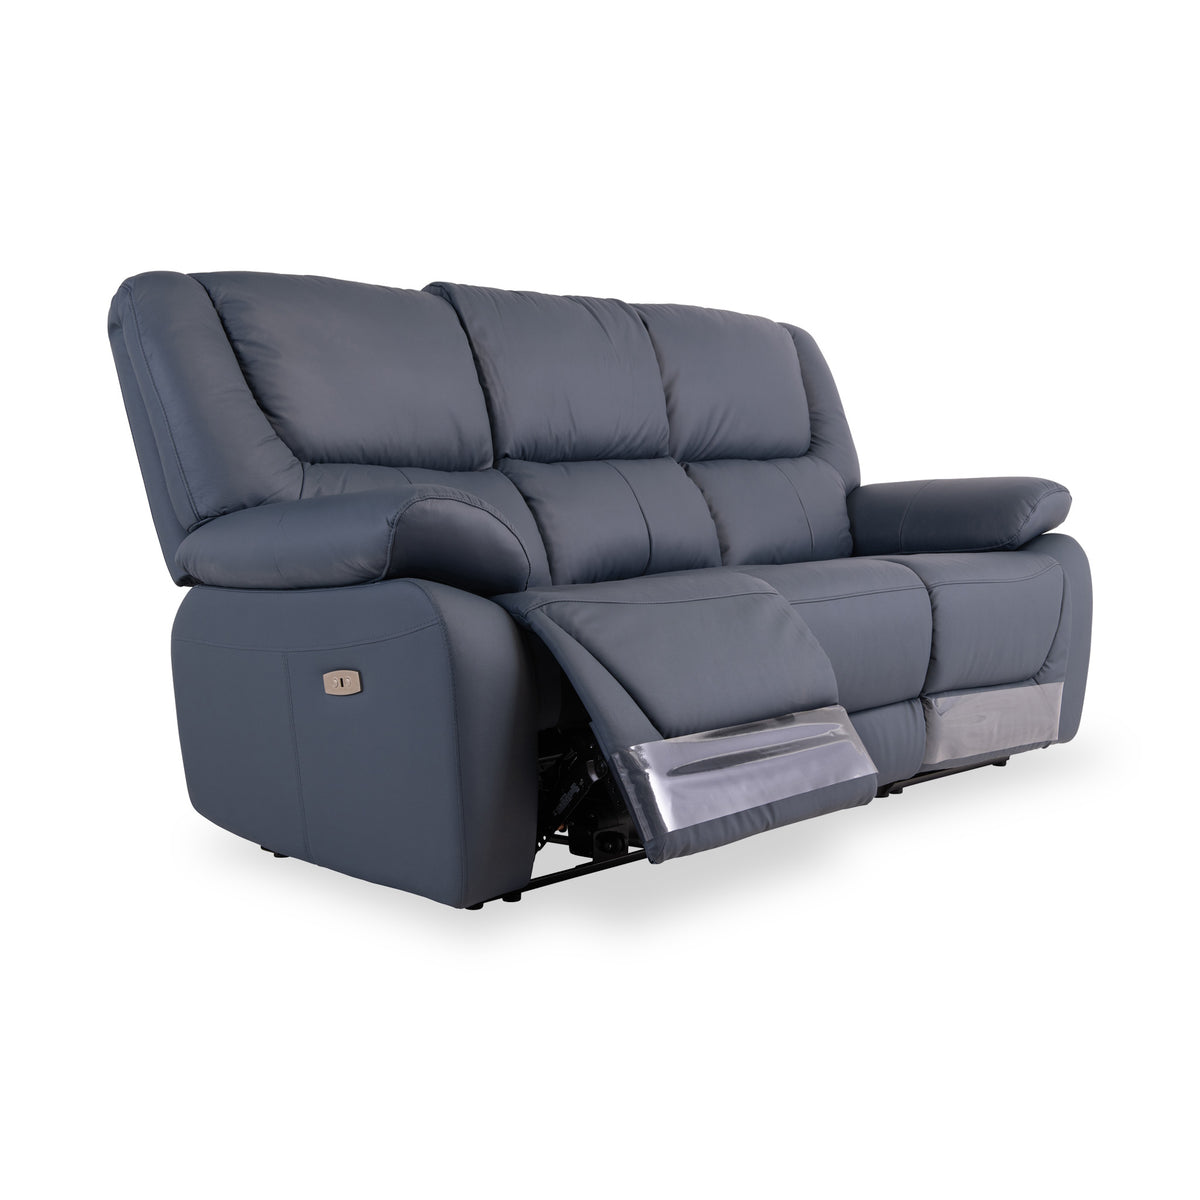 Baxter Charcoal Blue Leather Electric Reclining 3 Seater Settee